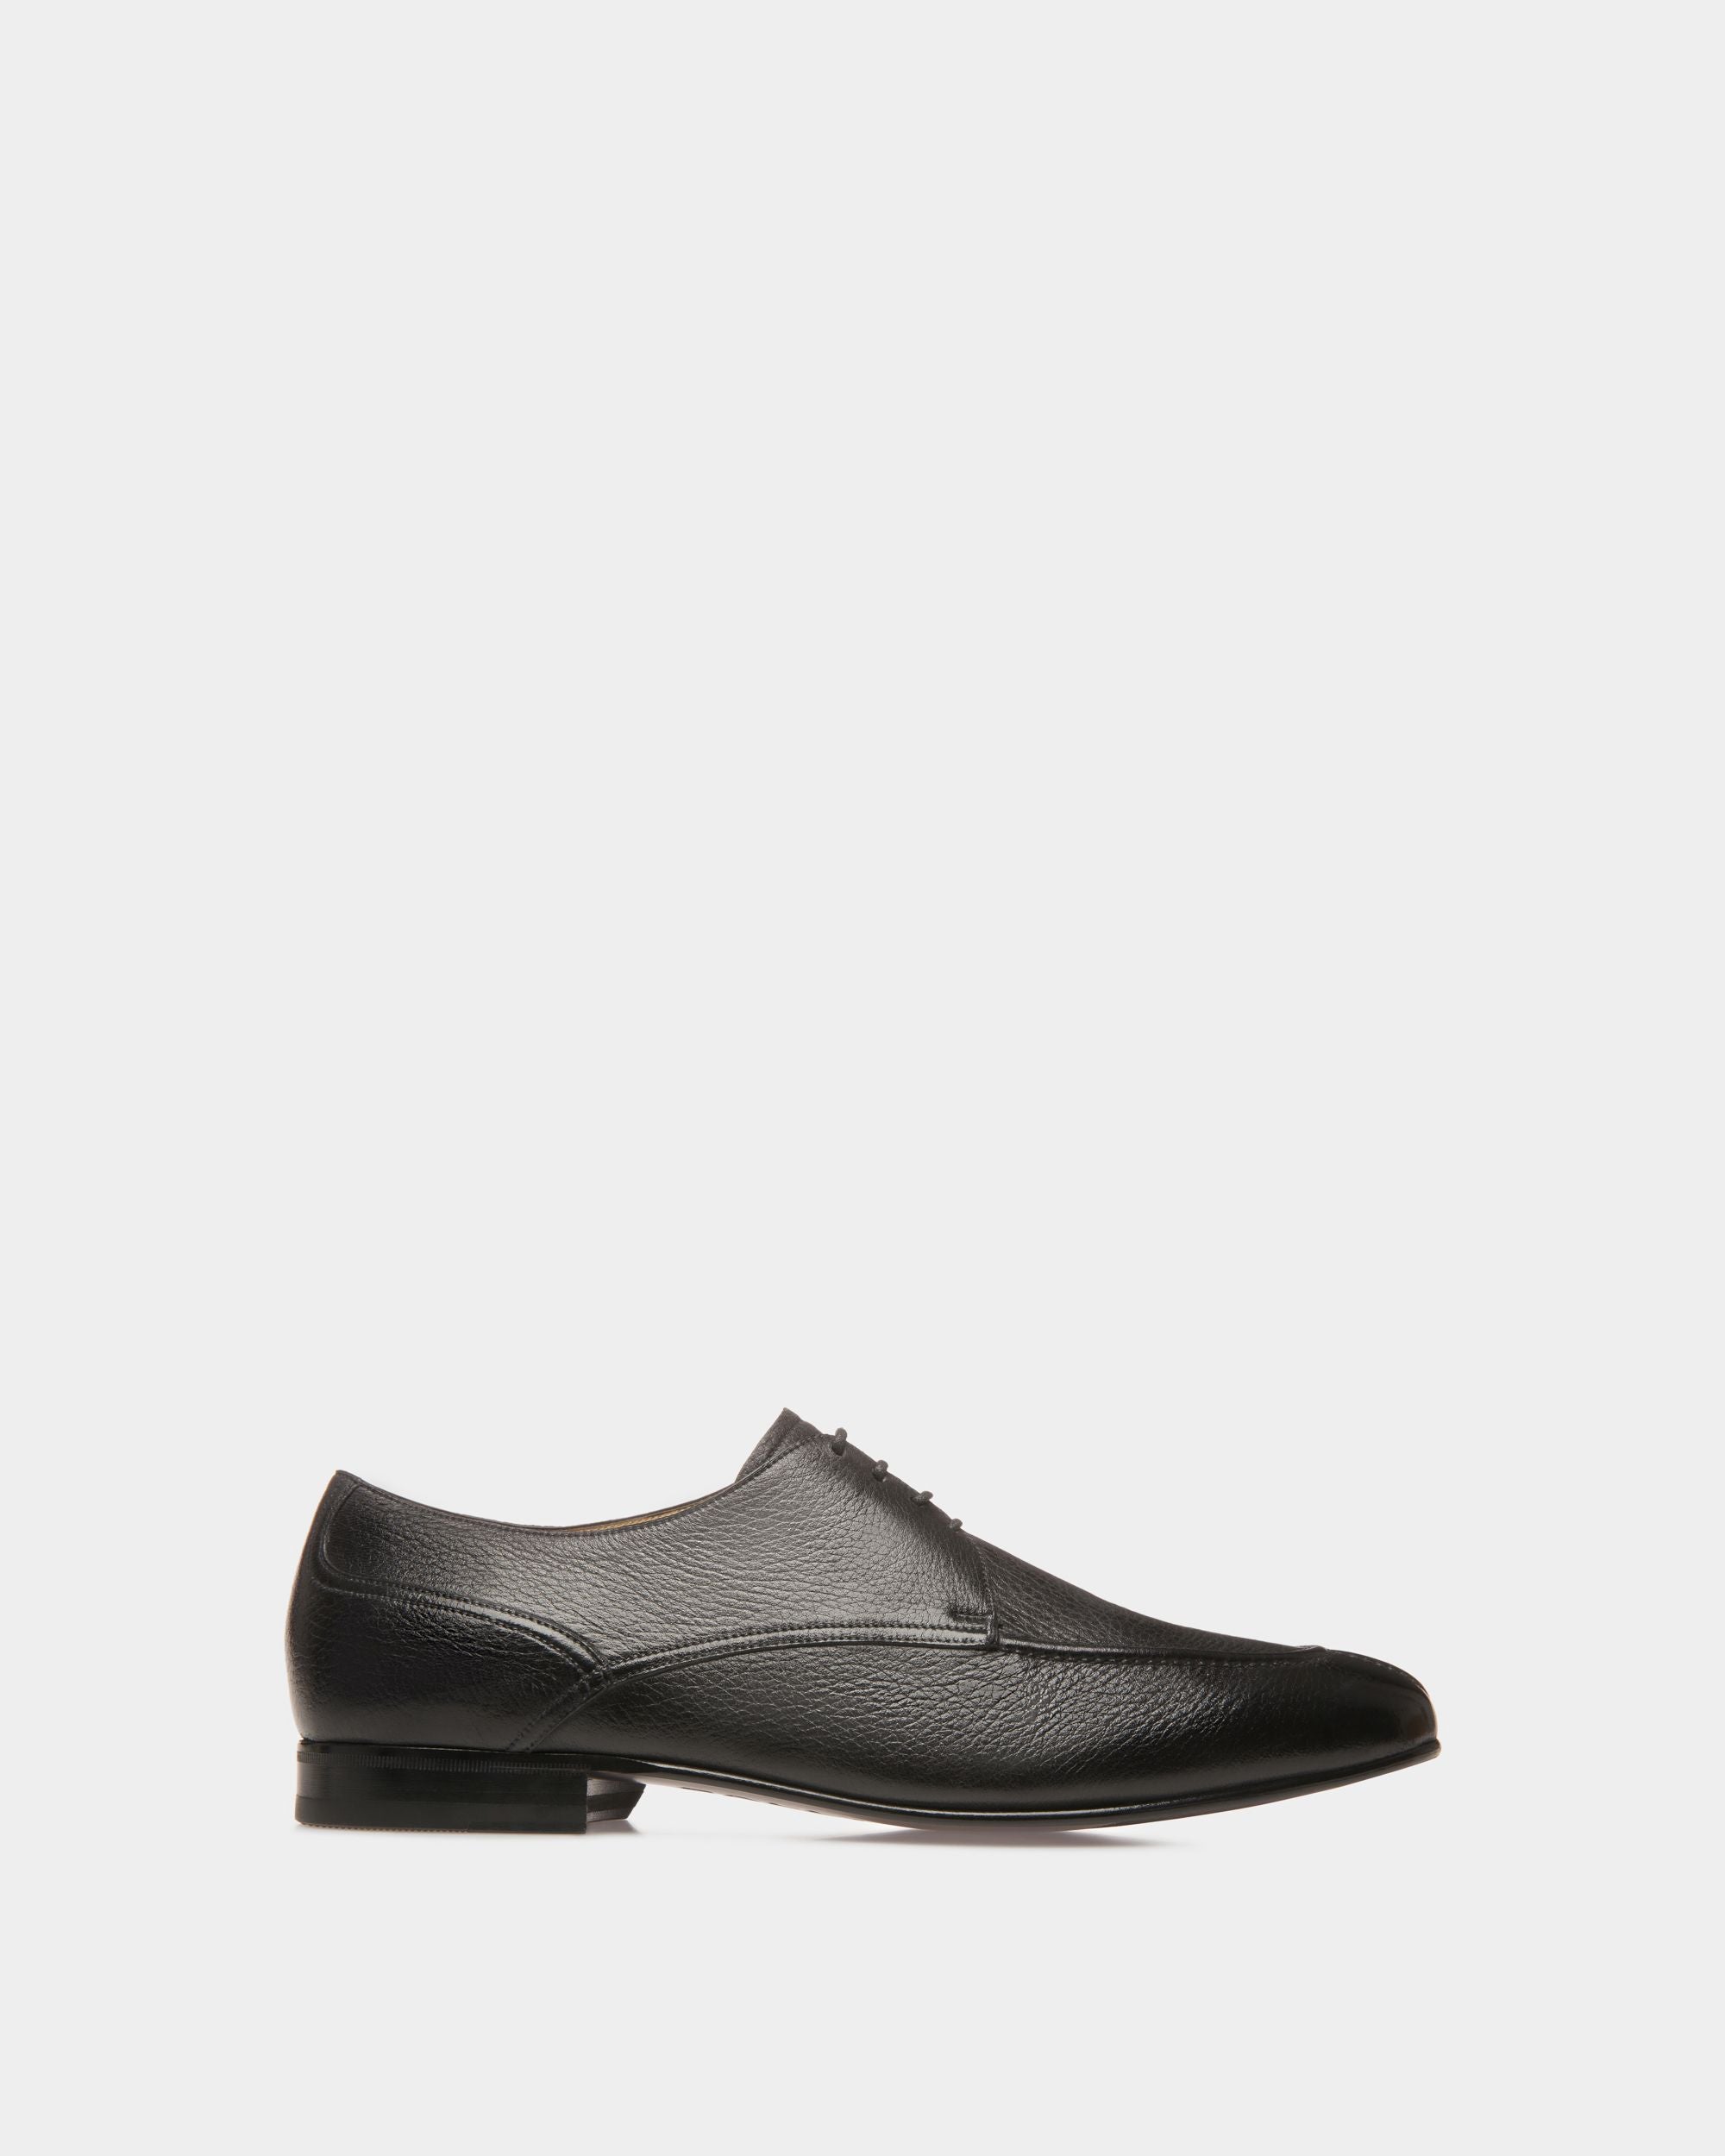 Saele | Men's Derby Shoes | Black Leather | Bally | Still Life Side